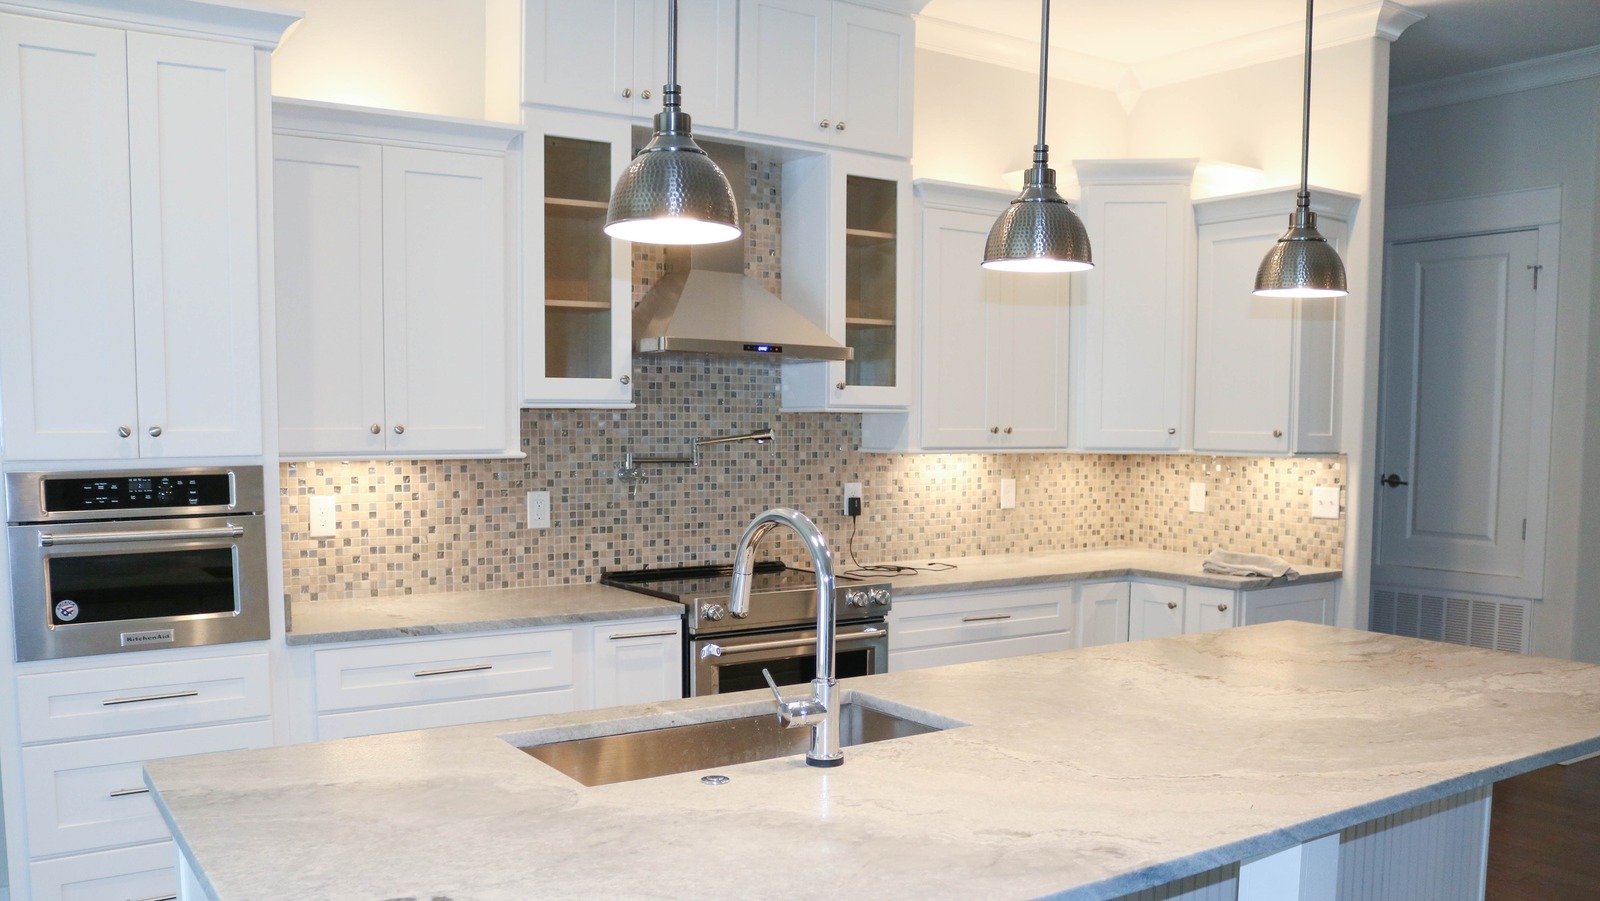 These Are The Best Granite Countertop Colors